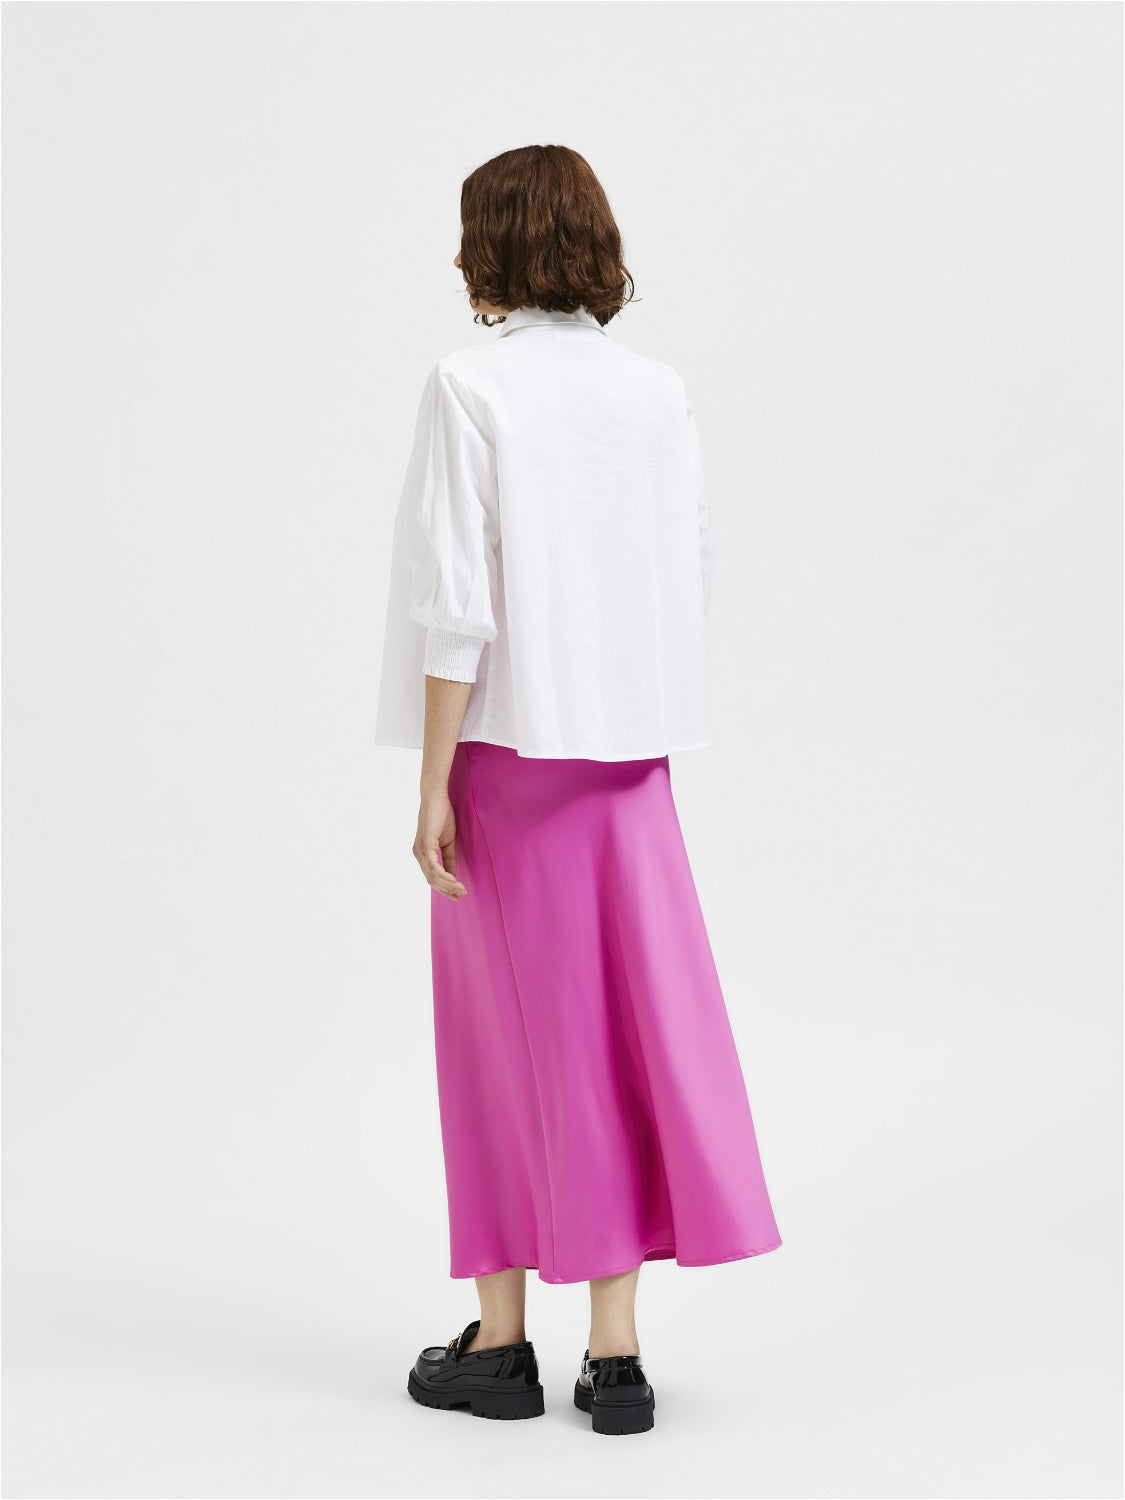 SELECTED FEMME - SIA Shirts - Bright White